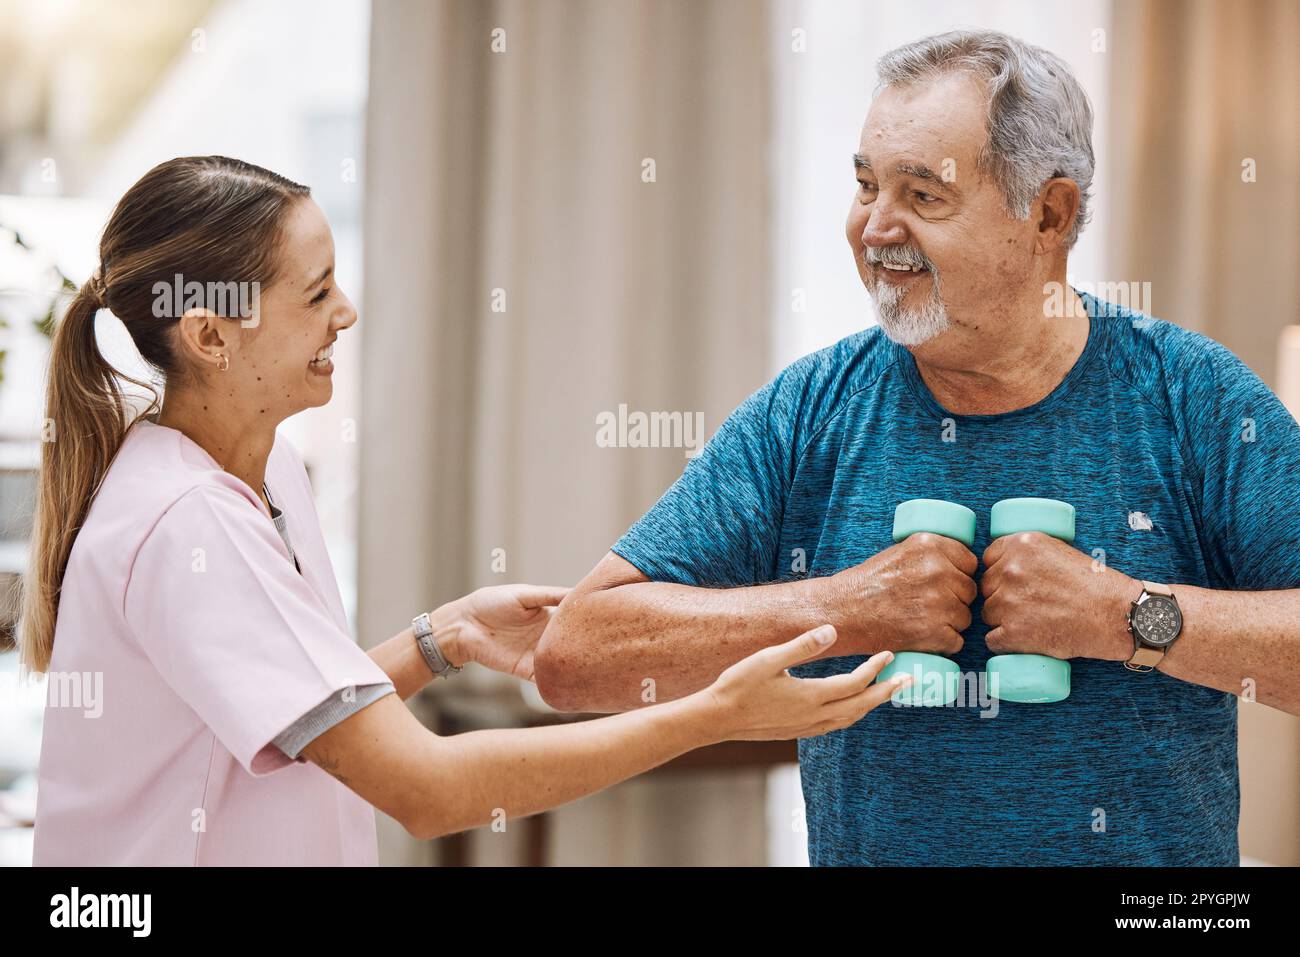 Exercise, physiotherapy and senior man with a physiotherapist for healthcare training, rehabilitation and fitness support. Strength training, workout and doctor with motivation for elderly patient Stock Photo